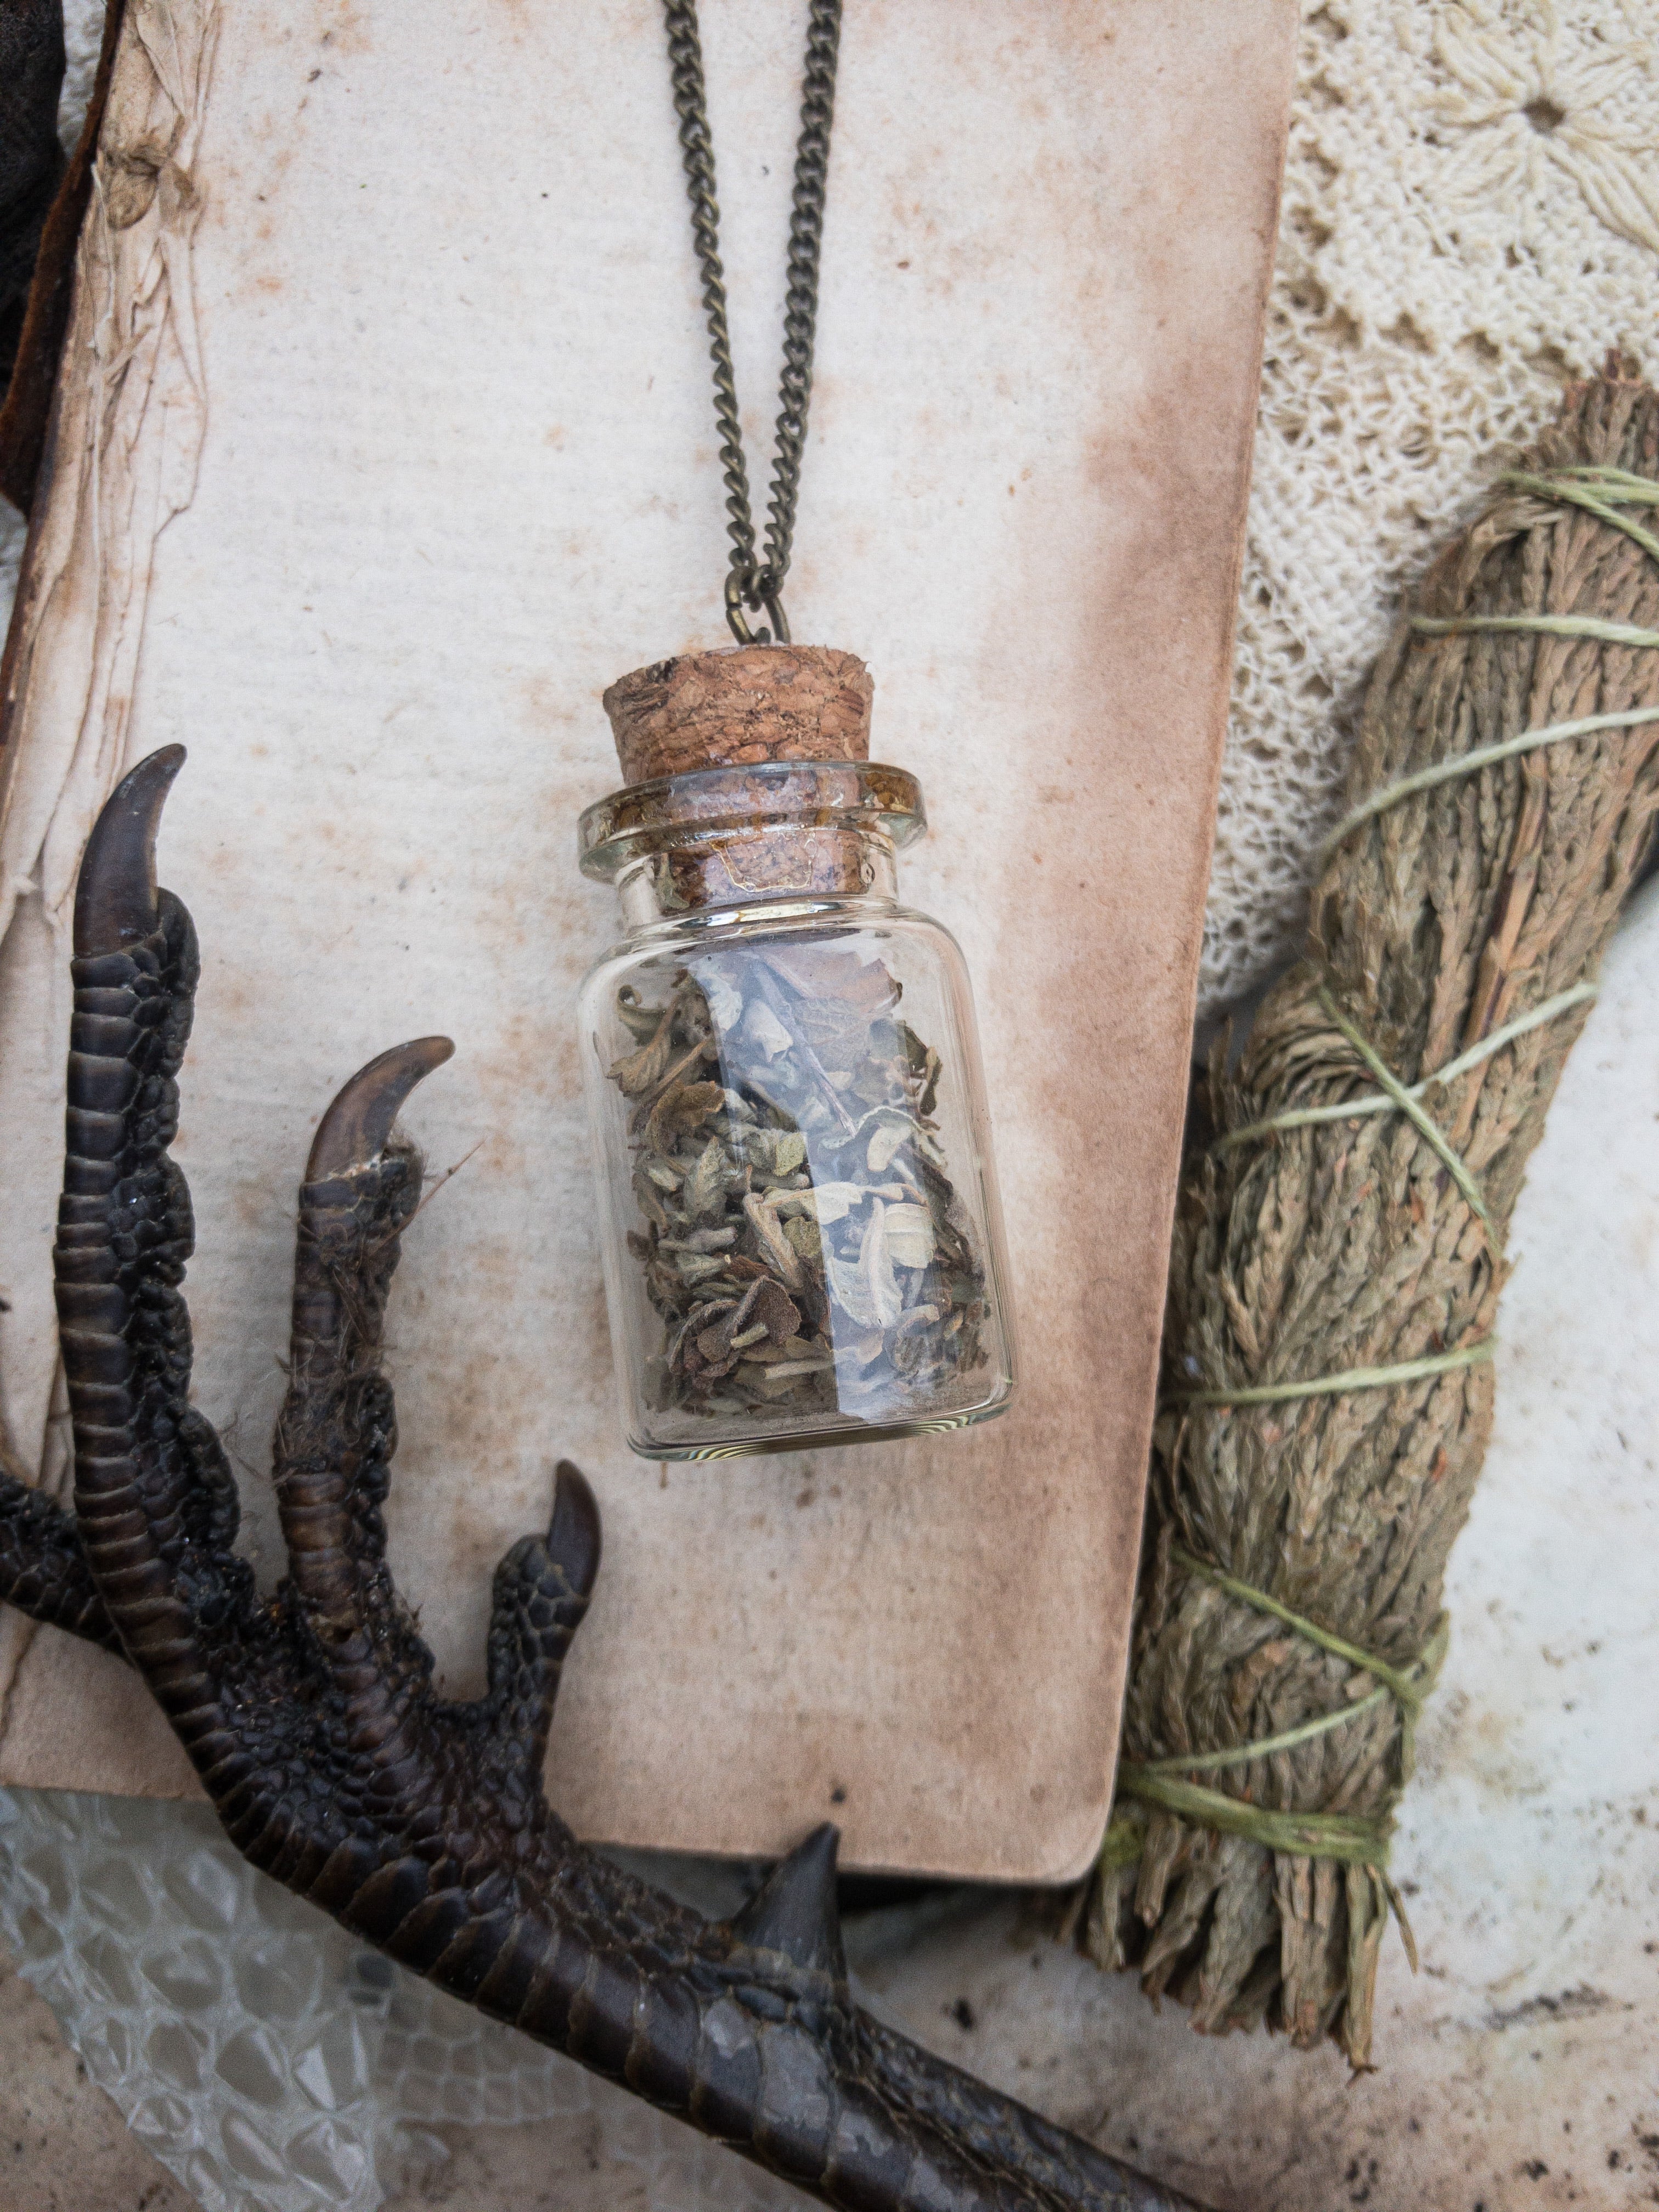 Necklace for Lucid Dreaming, Divination and Prophetic Visions with Mugwort + Lavender